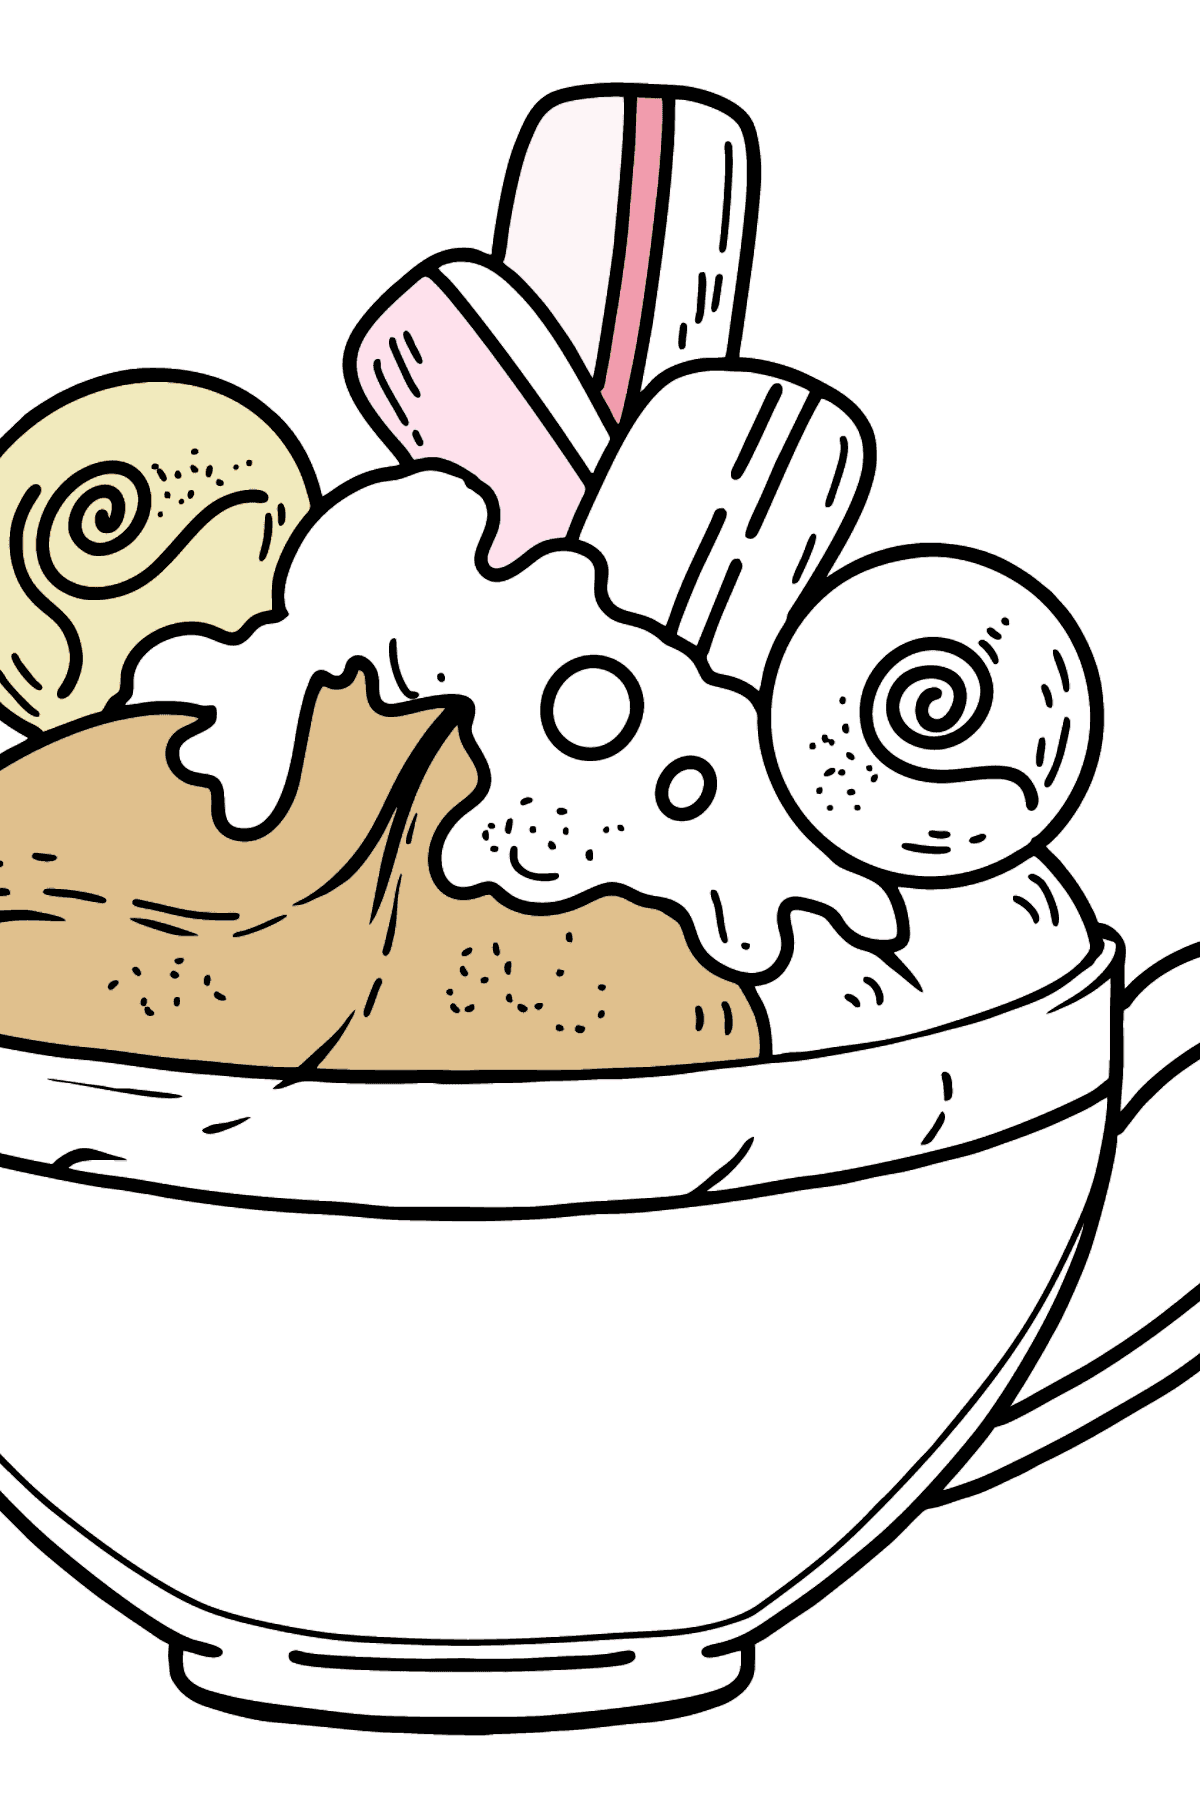 Coffee Cup coloring page - Coloring Pages for Kids